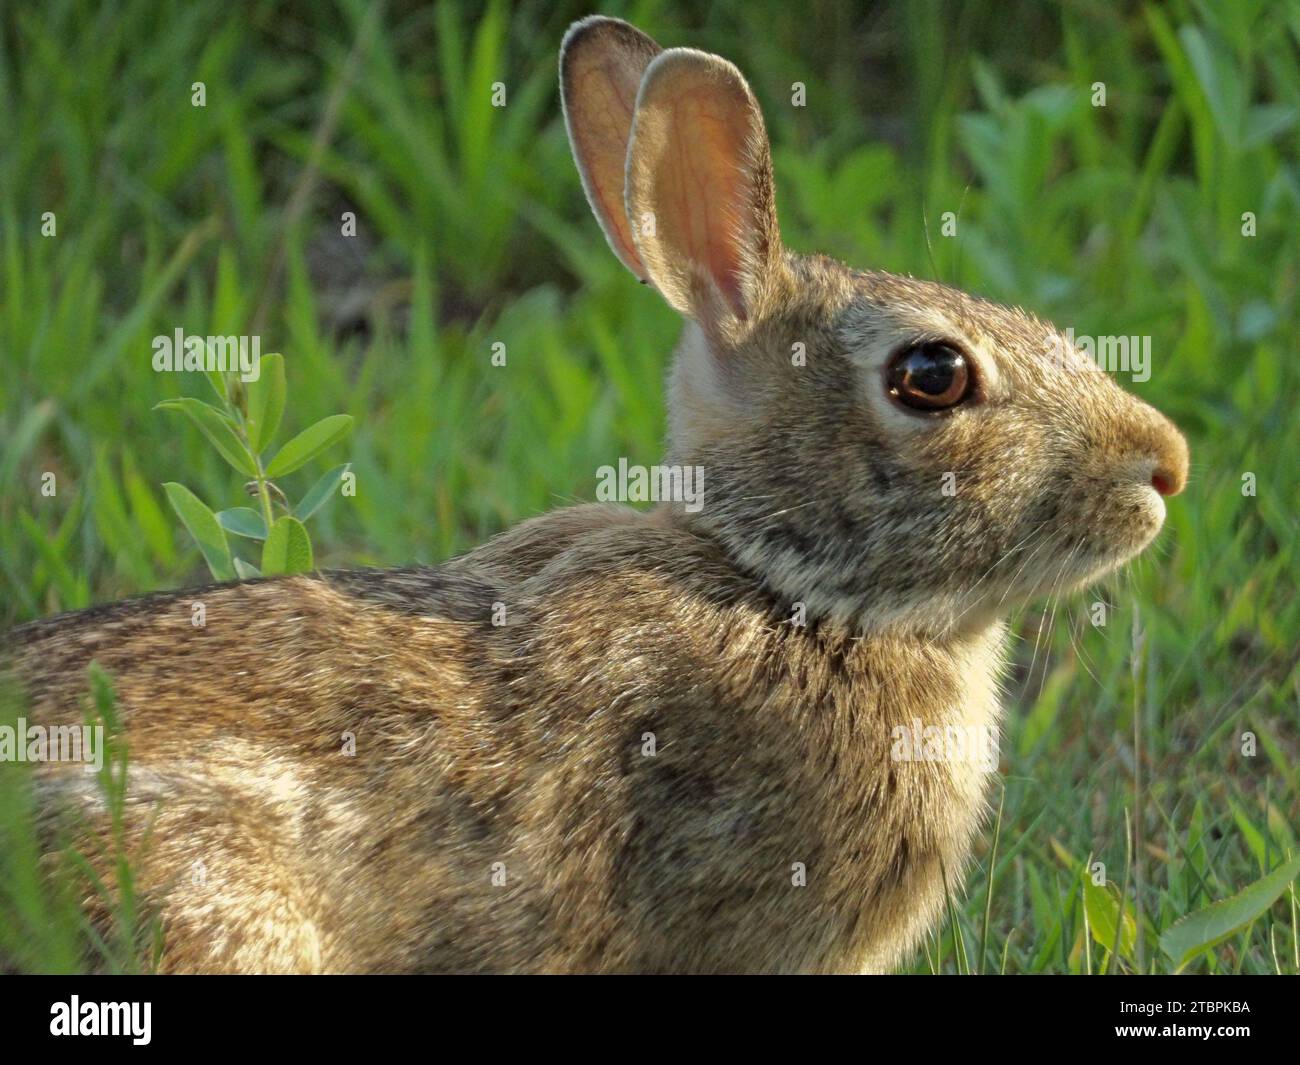 A close-up image of a brown and white rabbit in a grassy area, likely in a park Stock Photo